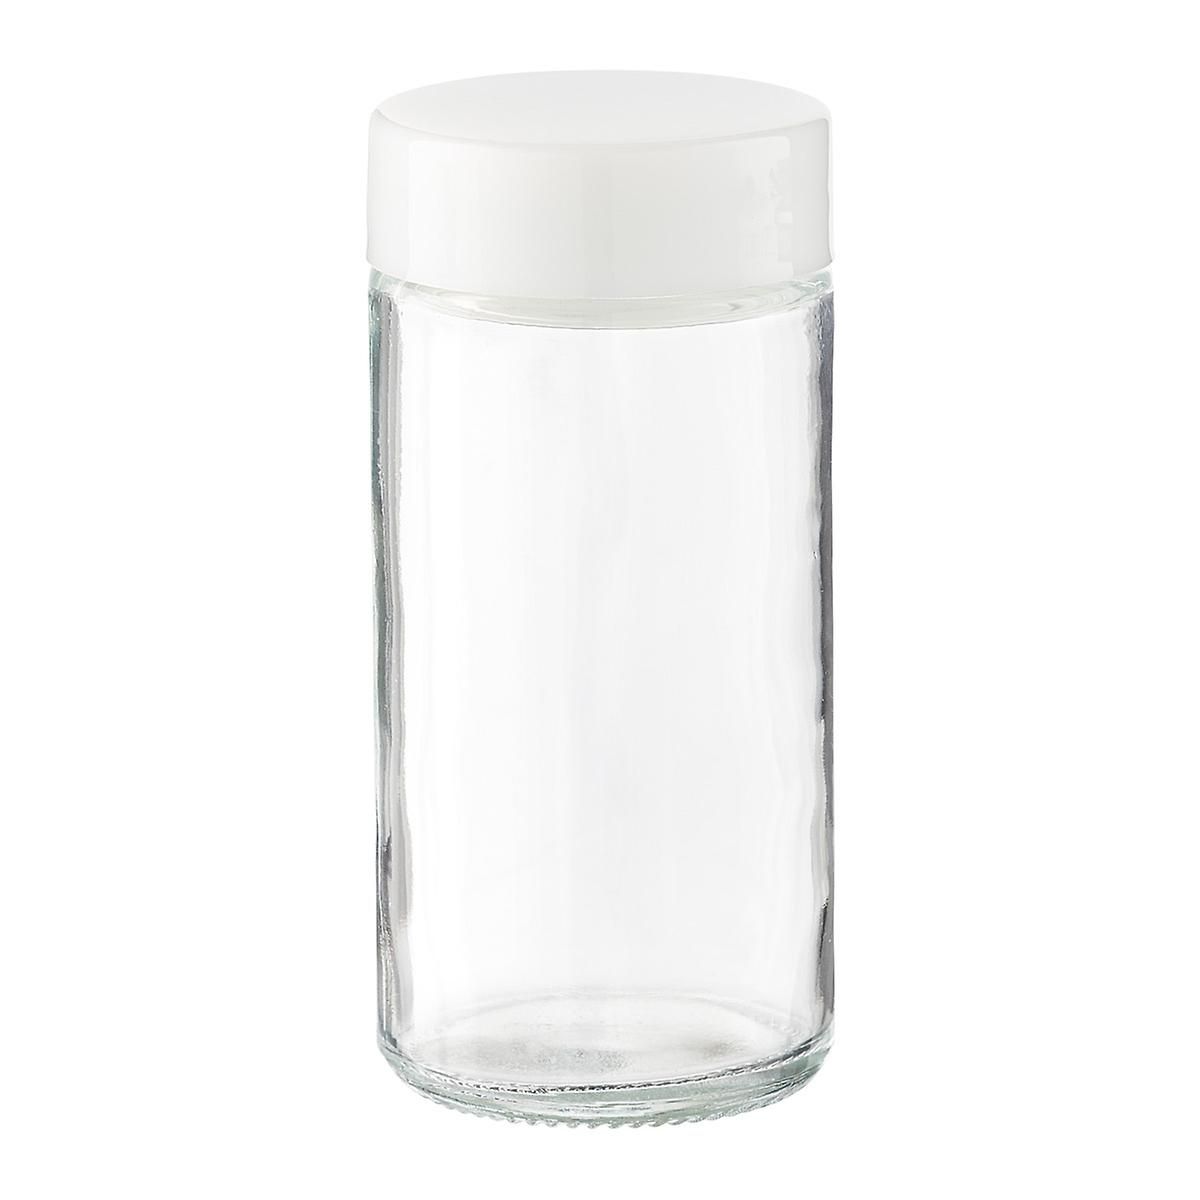 3 oz. Round Spice Bottle with White Lid | The Container Store